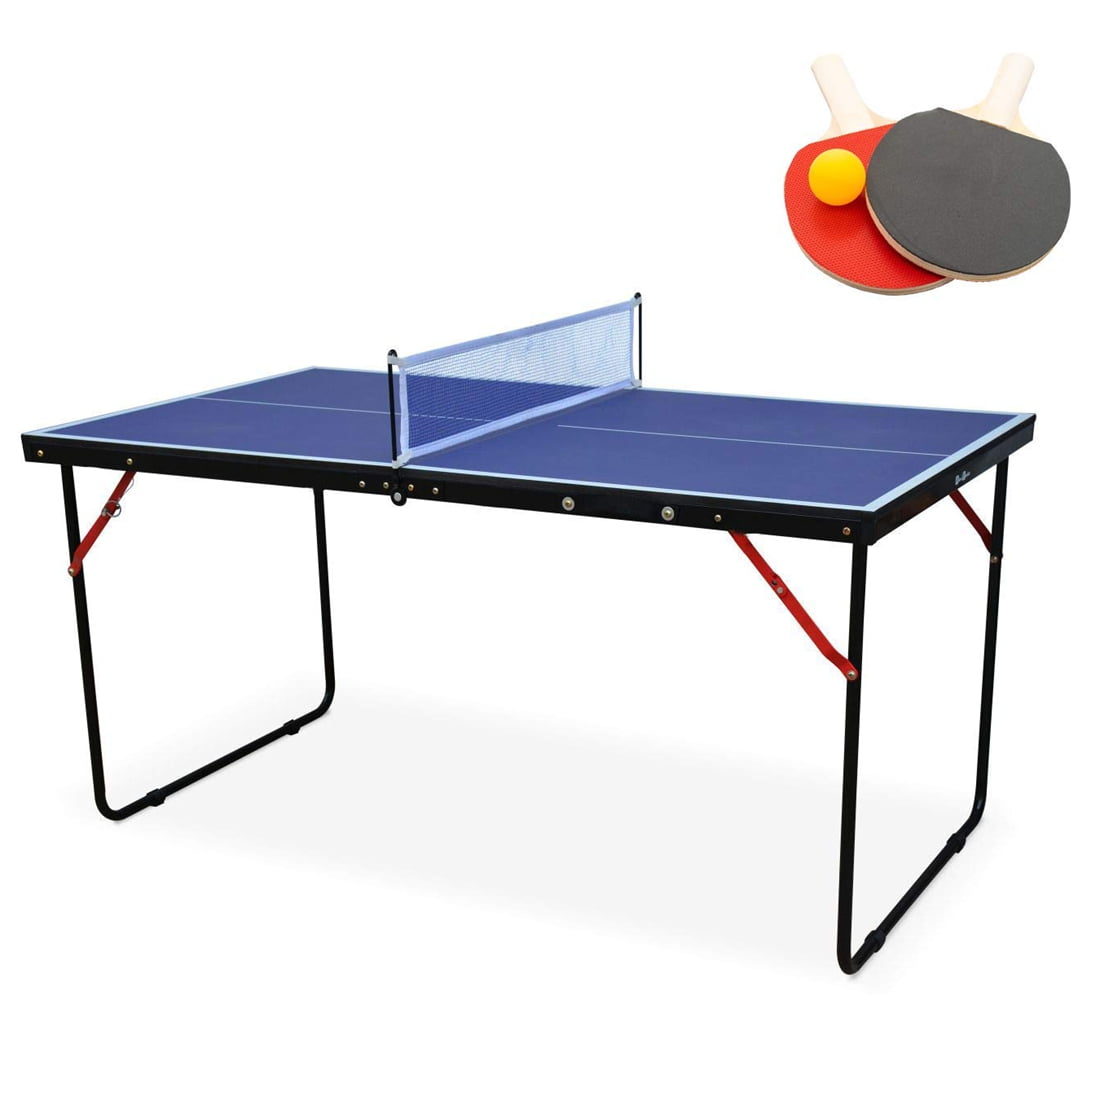 Hyper Pong 4 Way Table Tennis Table, Folding 4 Player 9mm thick Ping Pong  Table for Game Rooms and Basements